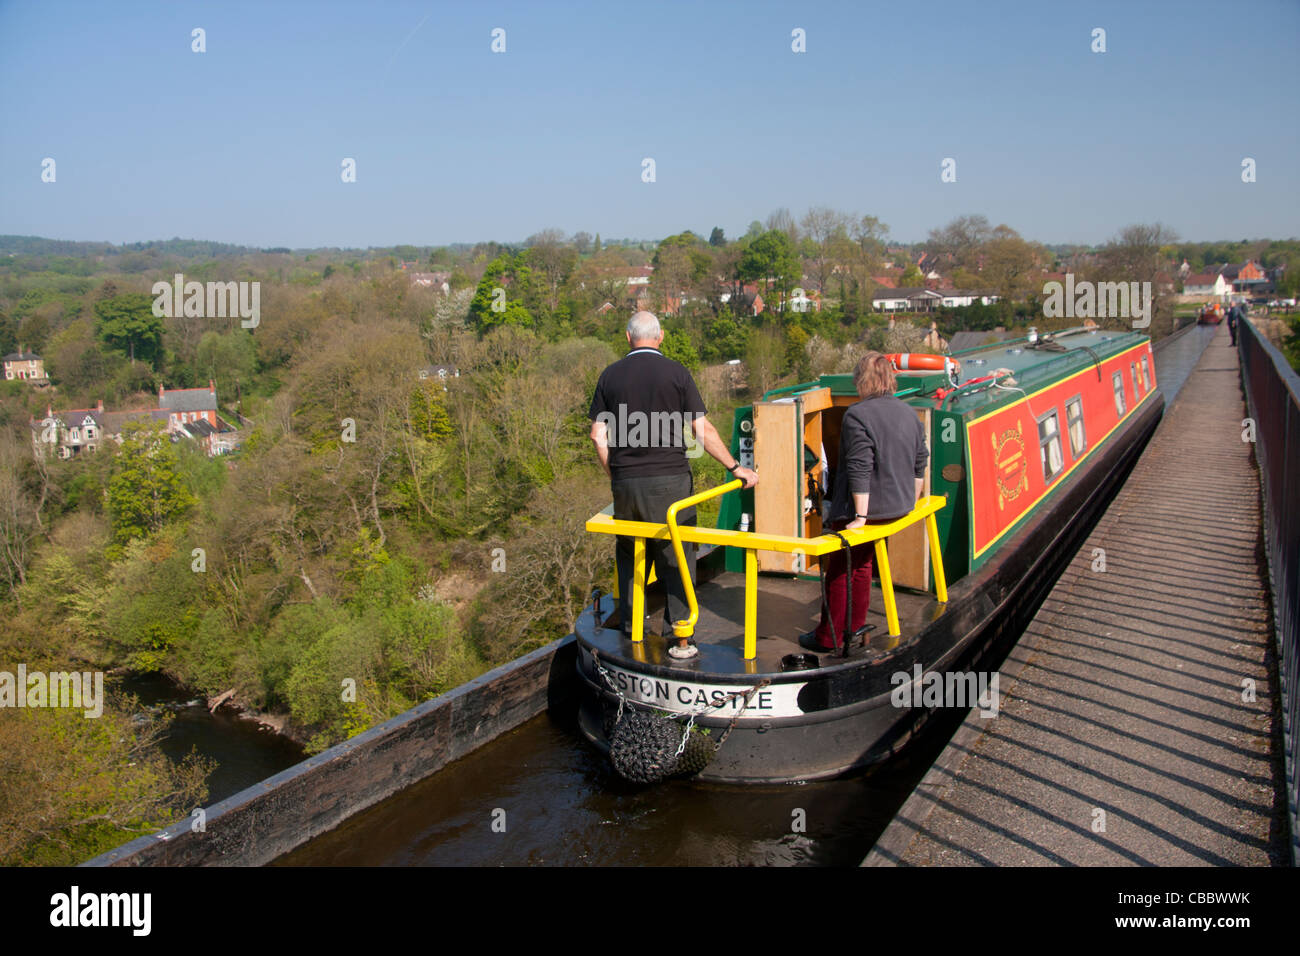 Narrowboats on Llangollen Canal on Pontcysyllte Aqueduct above River Dee Trevor Wrexham County North East Wales UK Stock Photo